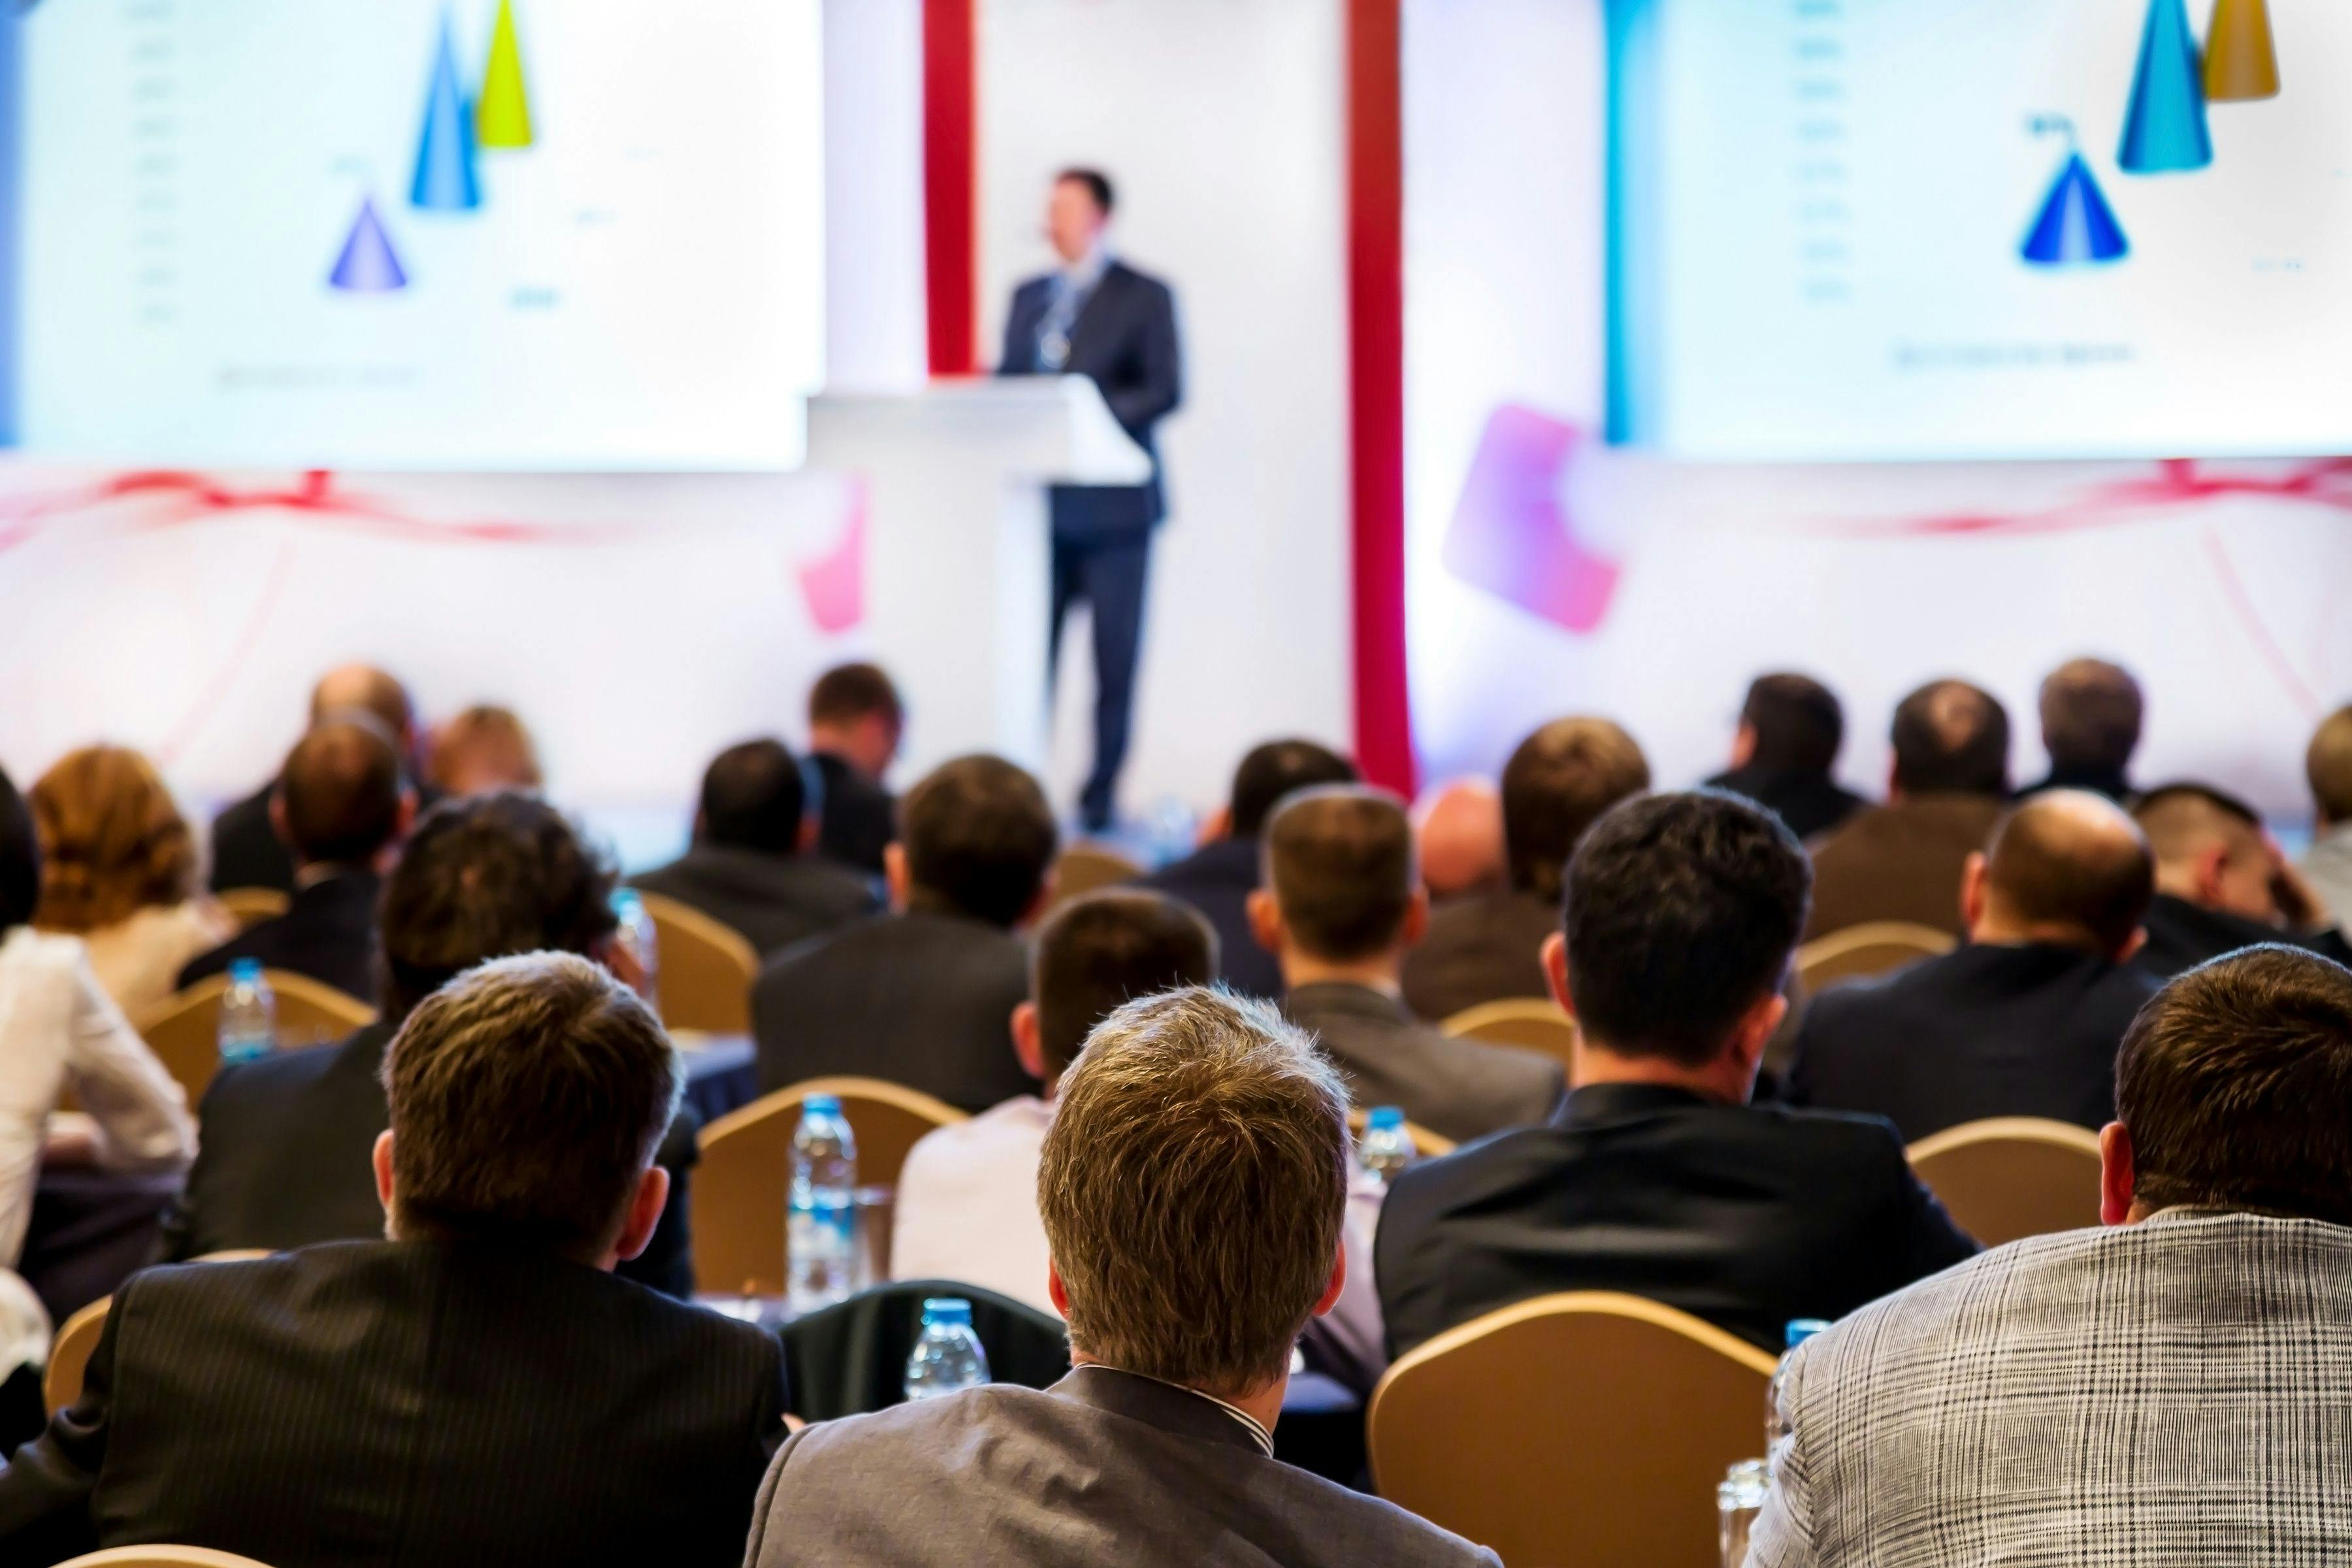 POLL: Do you plan on attending in-person conferences this month?